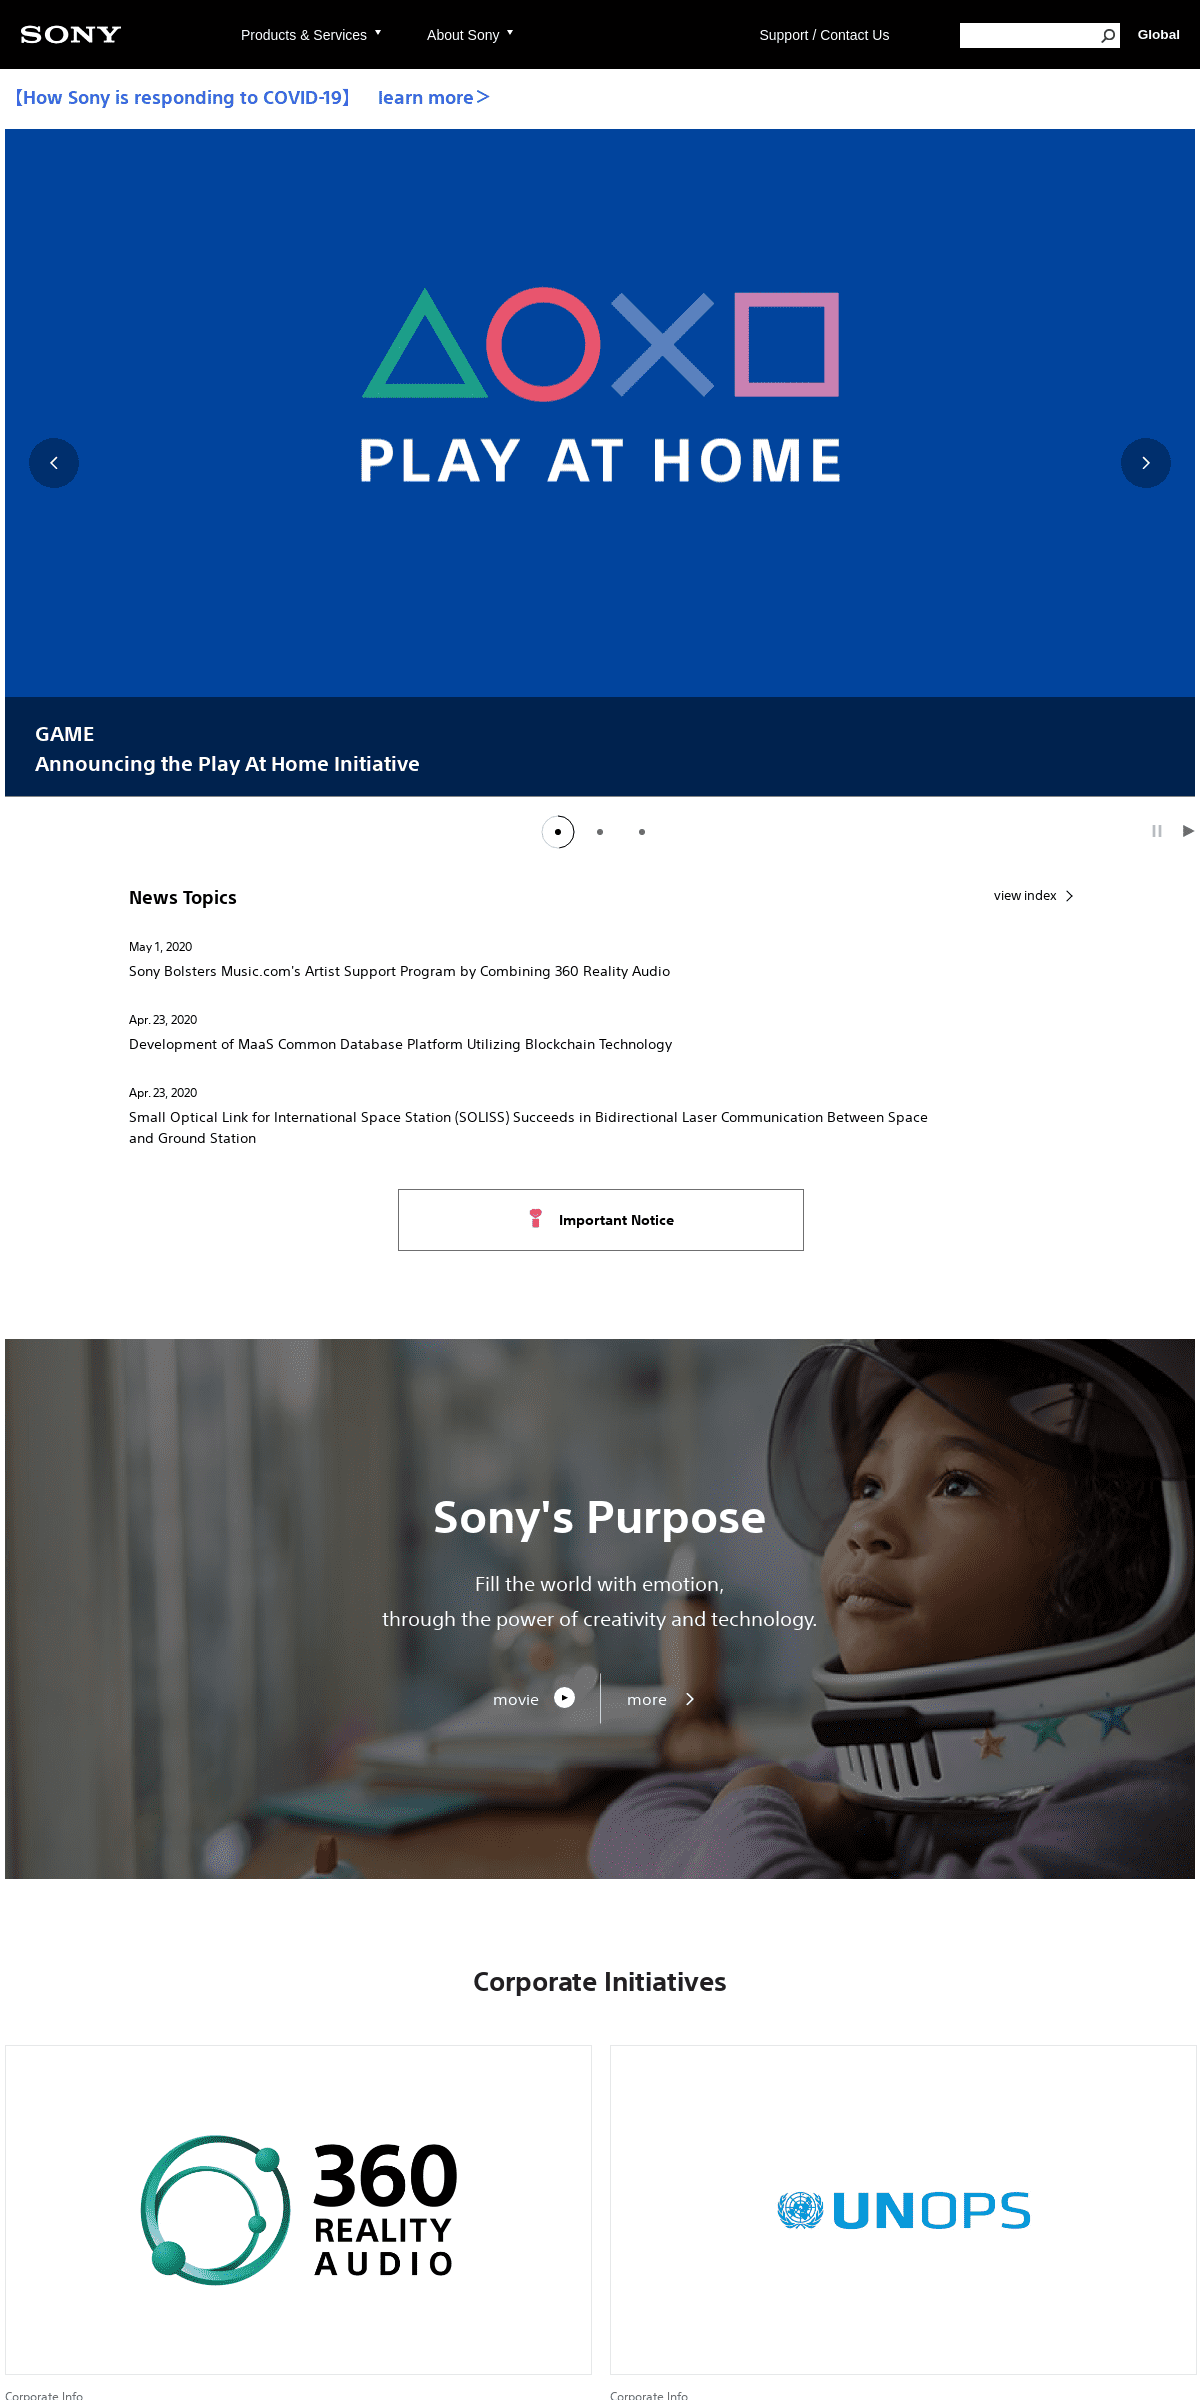 A complete backup of sony.net